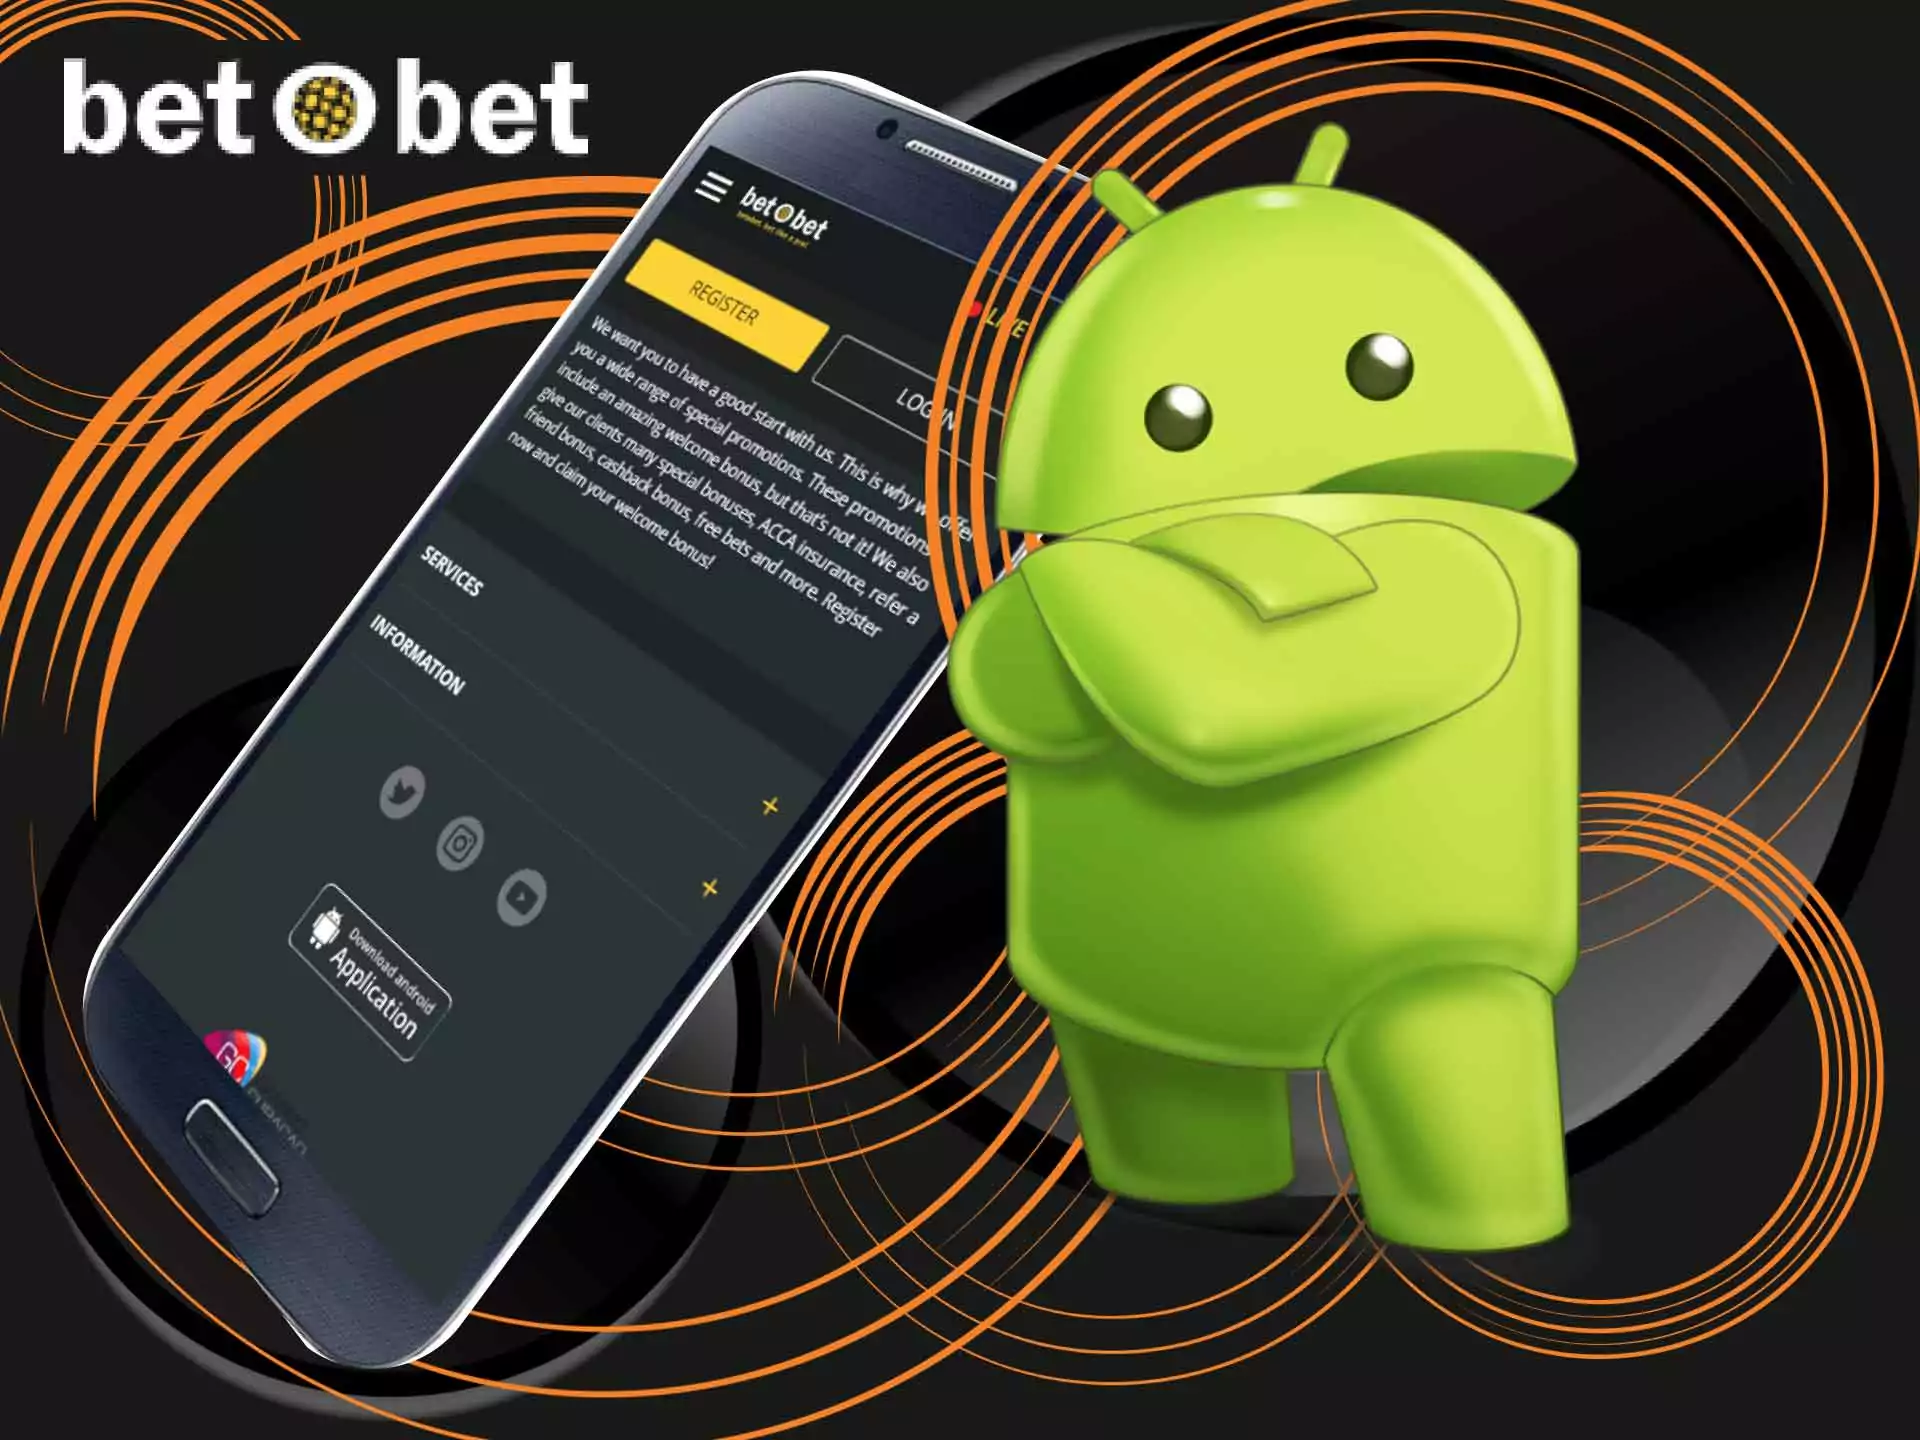 Download the BetOBet app on your Android smartphone.